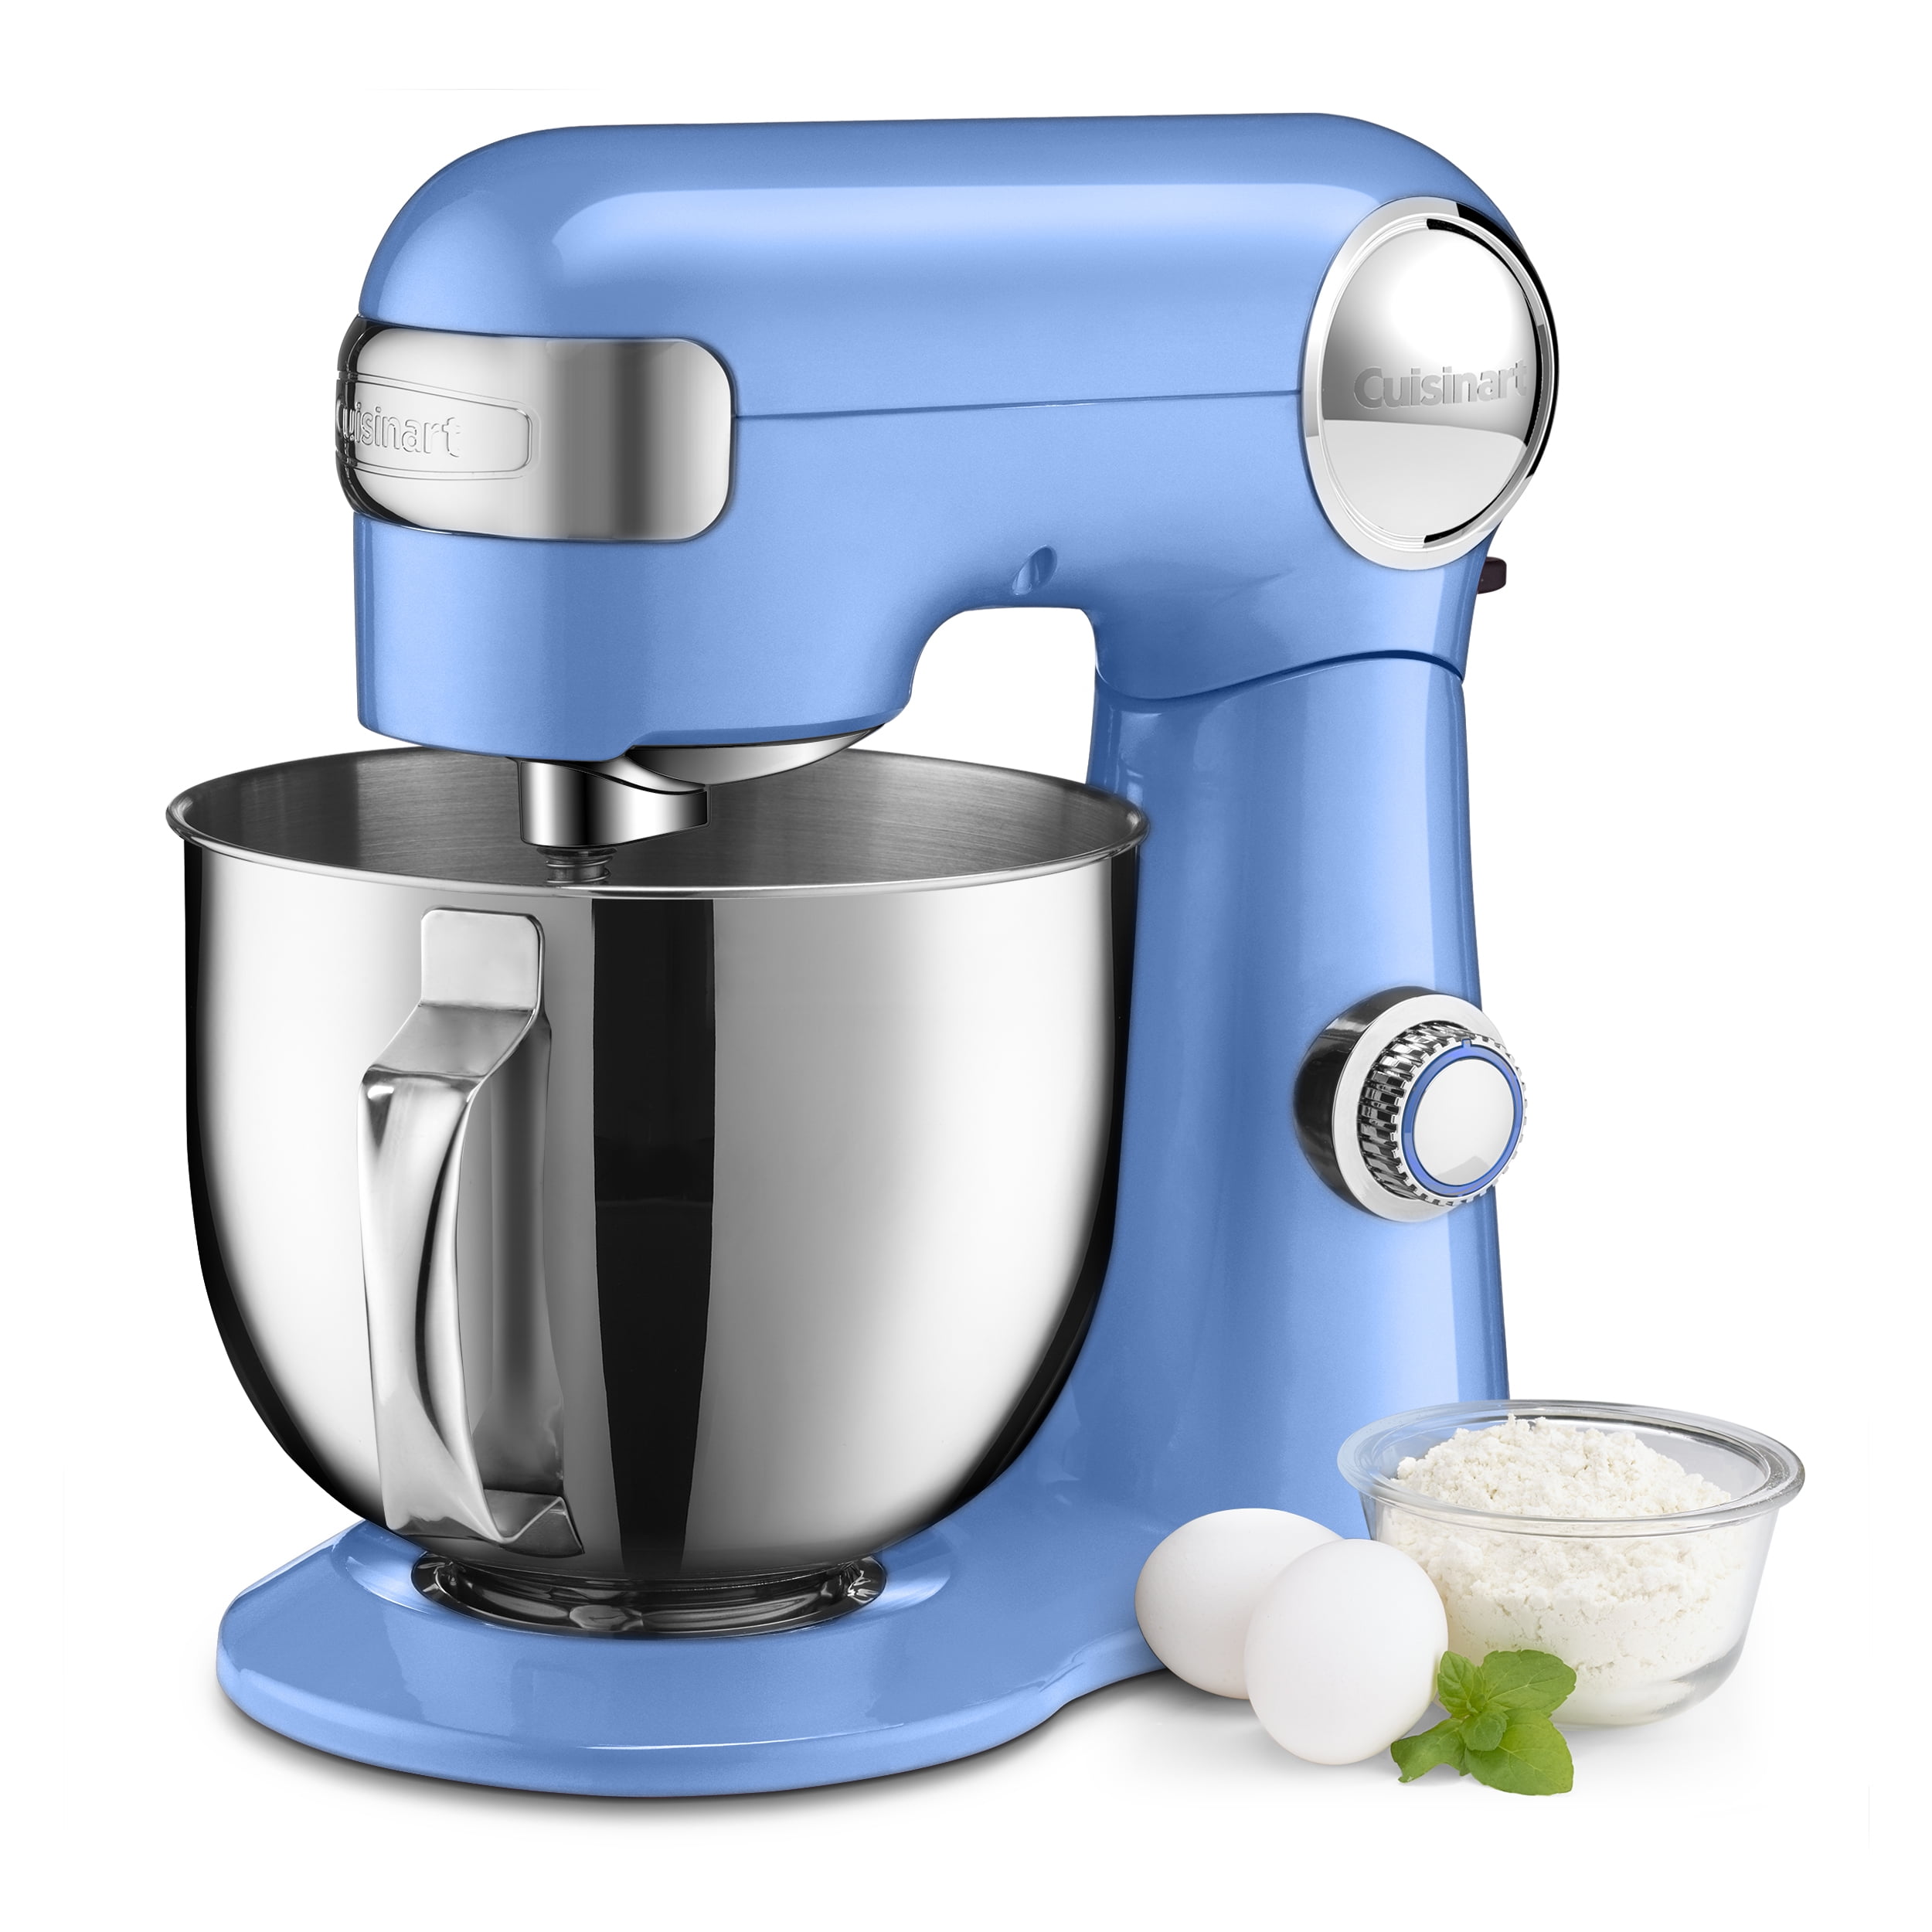 Cuisinart Stand Mixer Review (Is It Worth Buying?) - Prudent Reviews